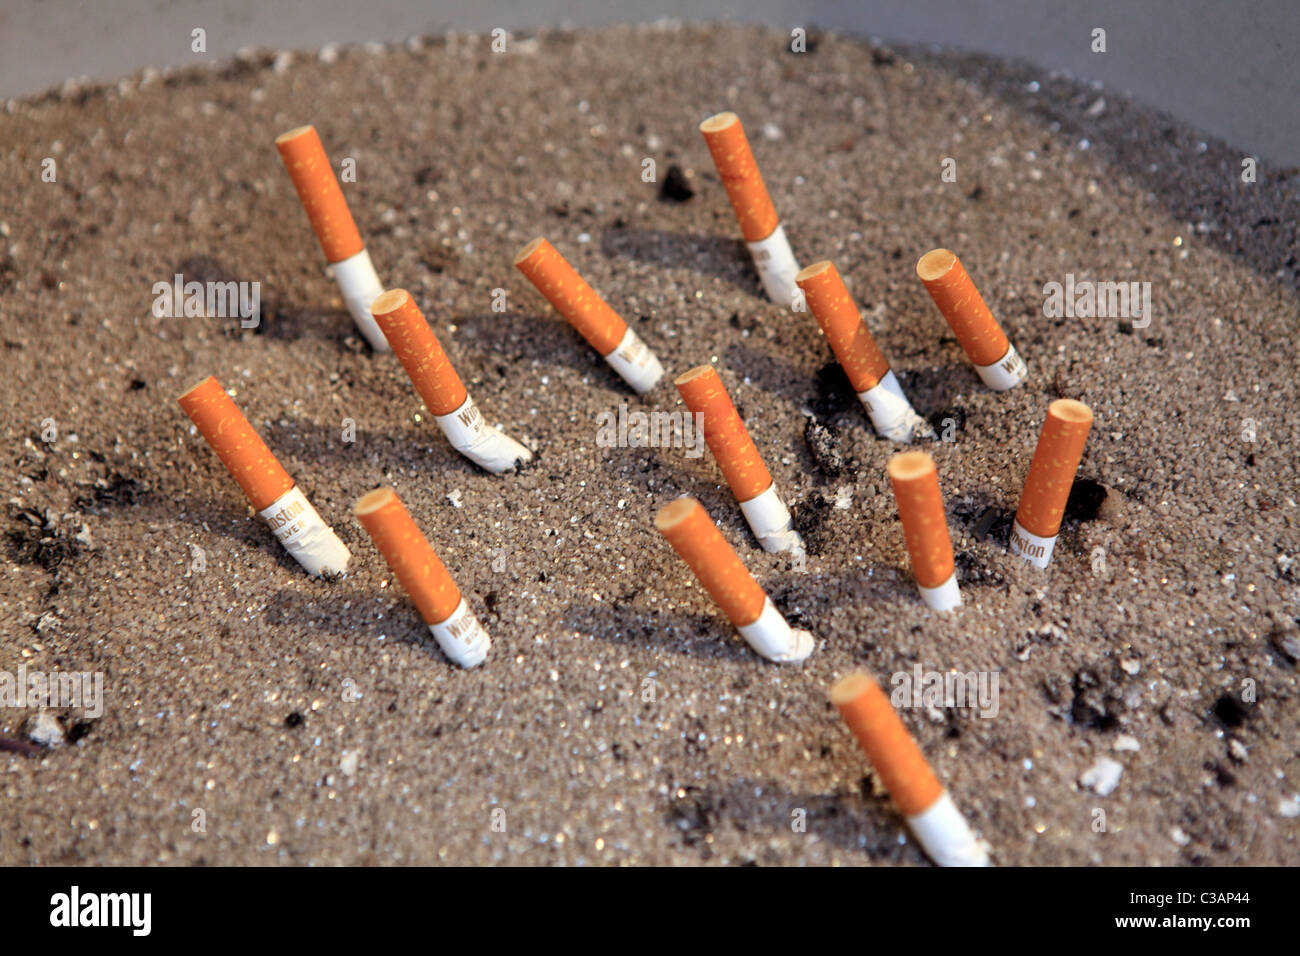 Cigarette ends stubbed out in sand Stock Photo